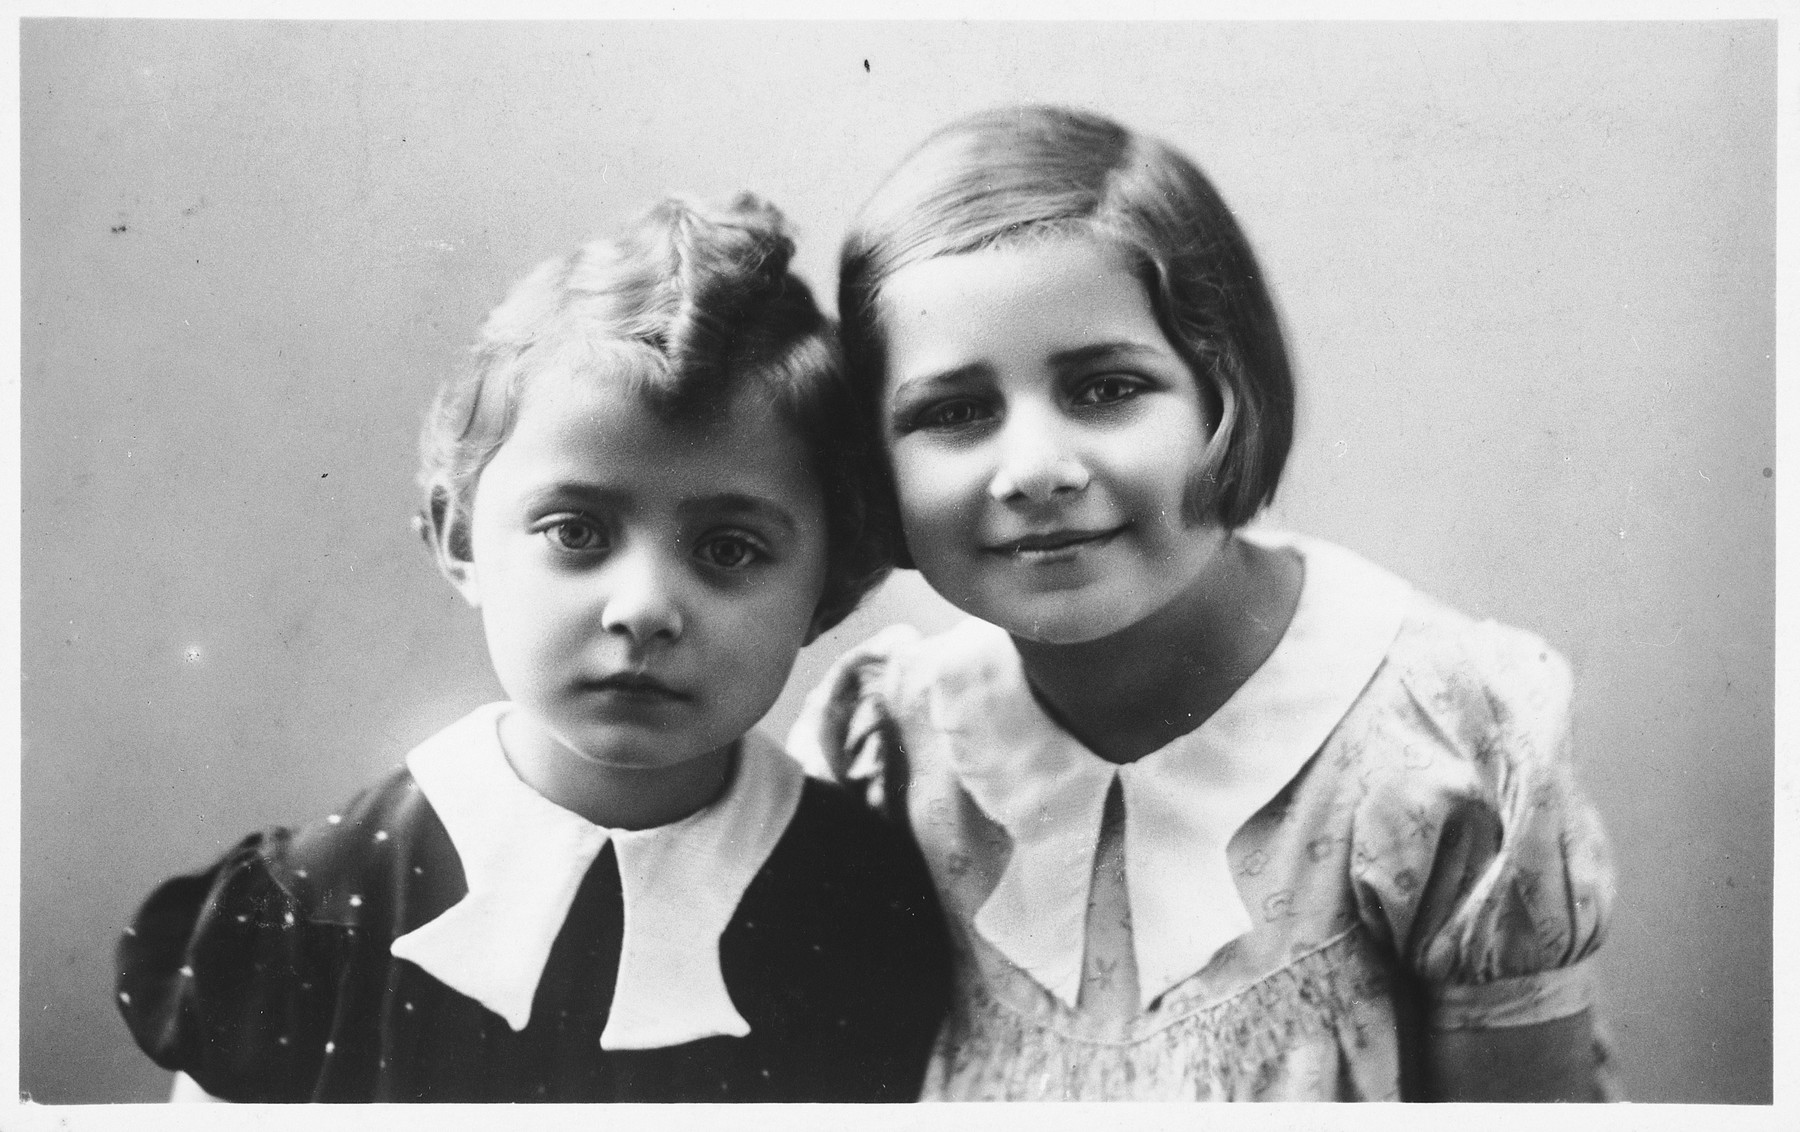 Studio portrait of two young Jewish sisters in Holice, Czechoslovakia.

Pictured are Gabriella and Katerina Frei.